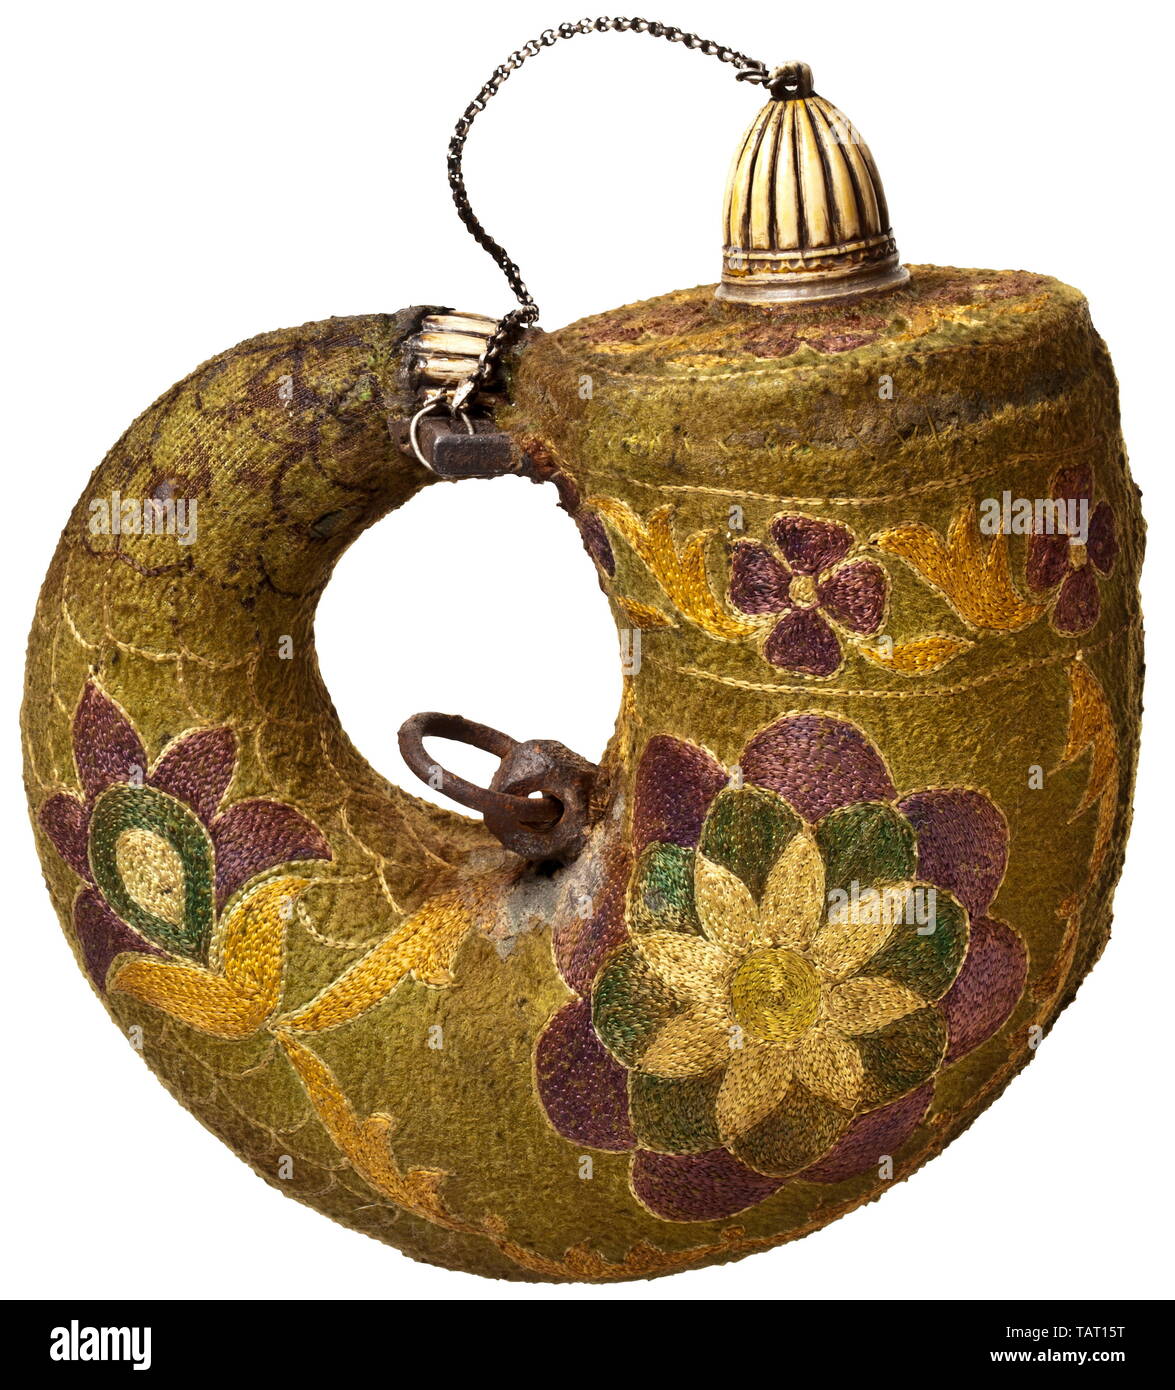 An Indian cloth-covered powder horn (Barutdan), 18th century, Nautilus-shaped wooden body, covered entirely with florally embroidered felt. Carved spout and stopper of ivory, two iron carrying rings (with flash rust). Width 19 cm. Similar pieces are exhibited in the Salar Jung Museum, Hyderabad. historic, historical, Additional-Rights-Clearance-Info-Not-Available Stock Photo